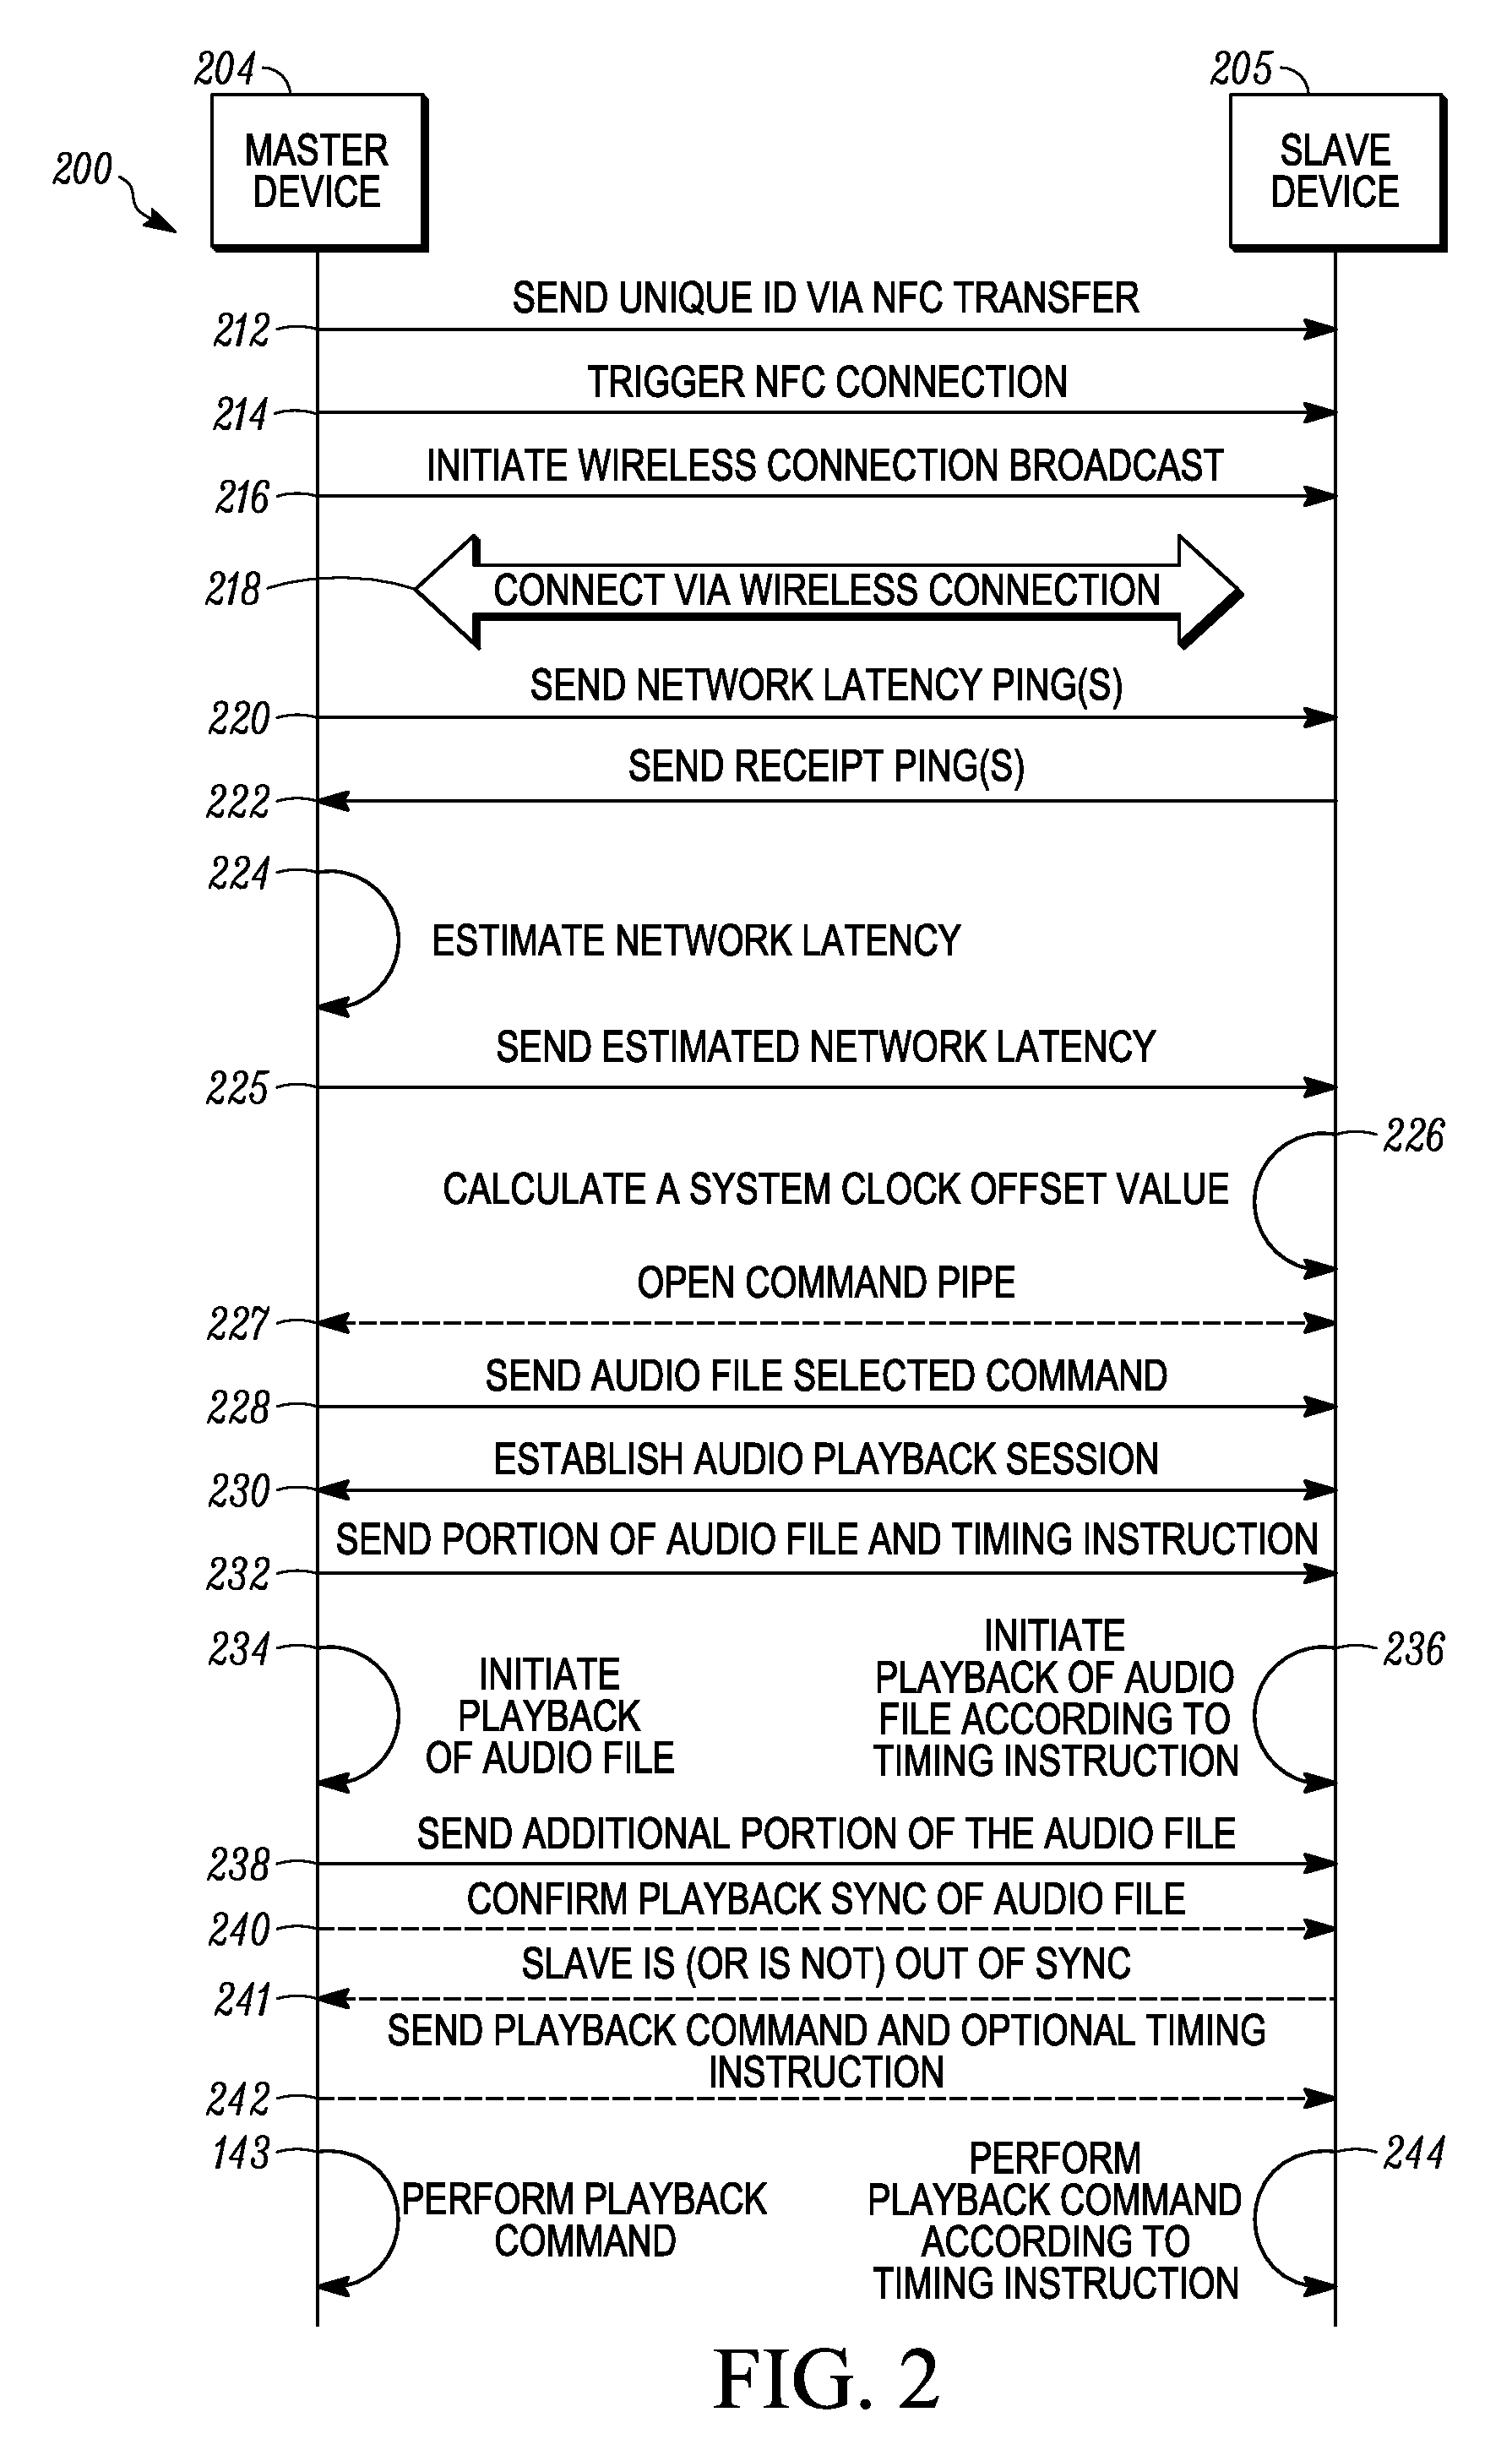 Systems and methods for syncronizing multiple electronic devices